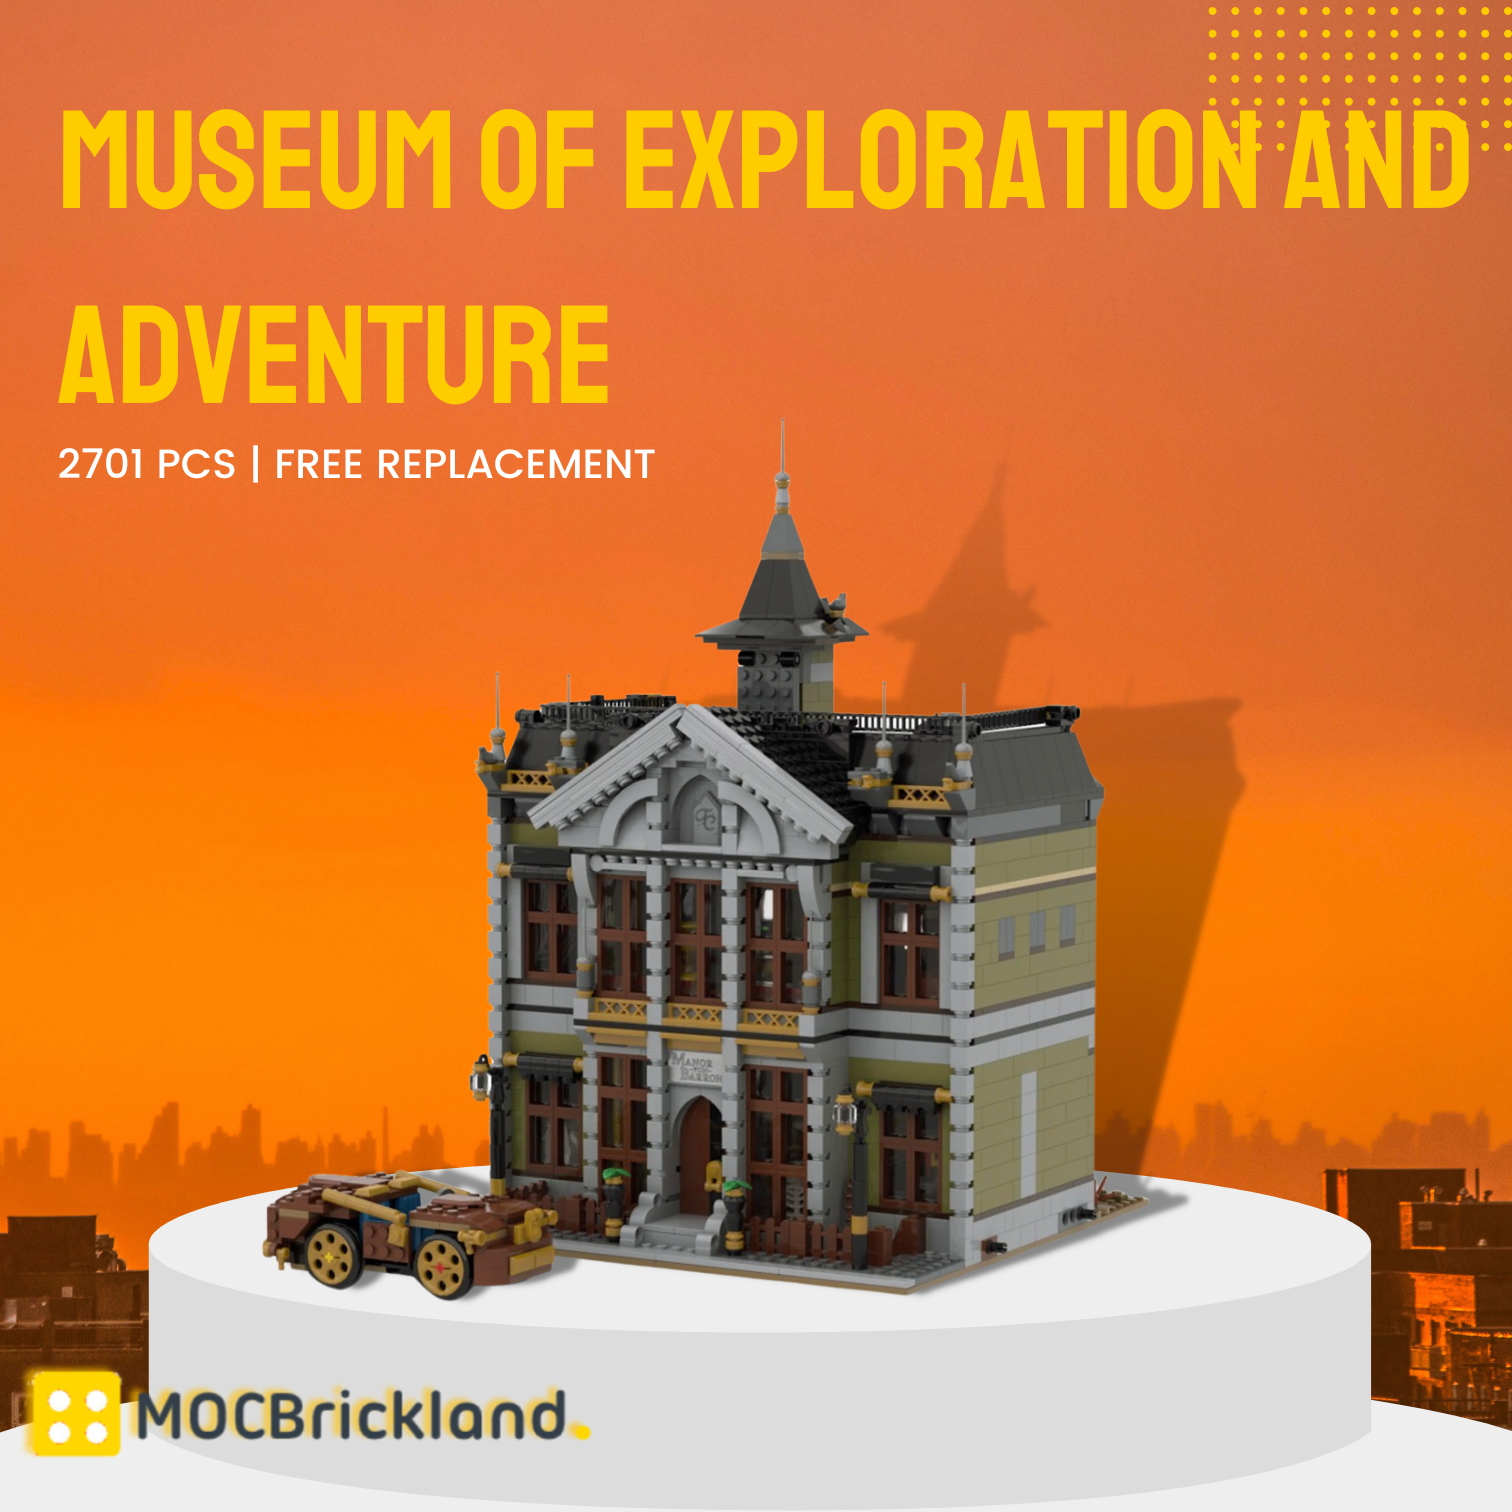 MOCBRICKLAND MOC-124106 Museum of Exploration and Adventure